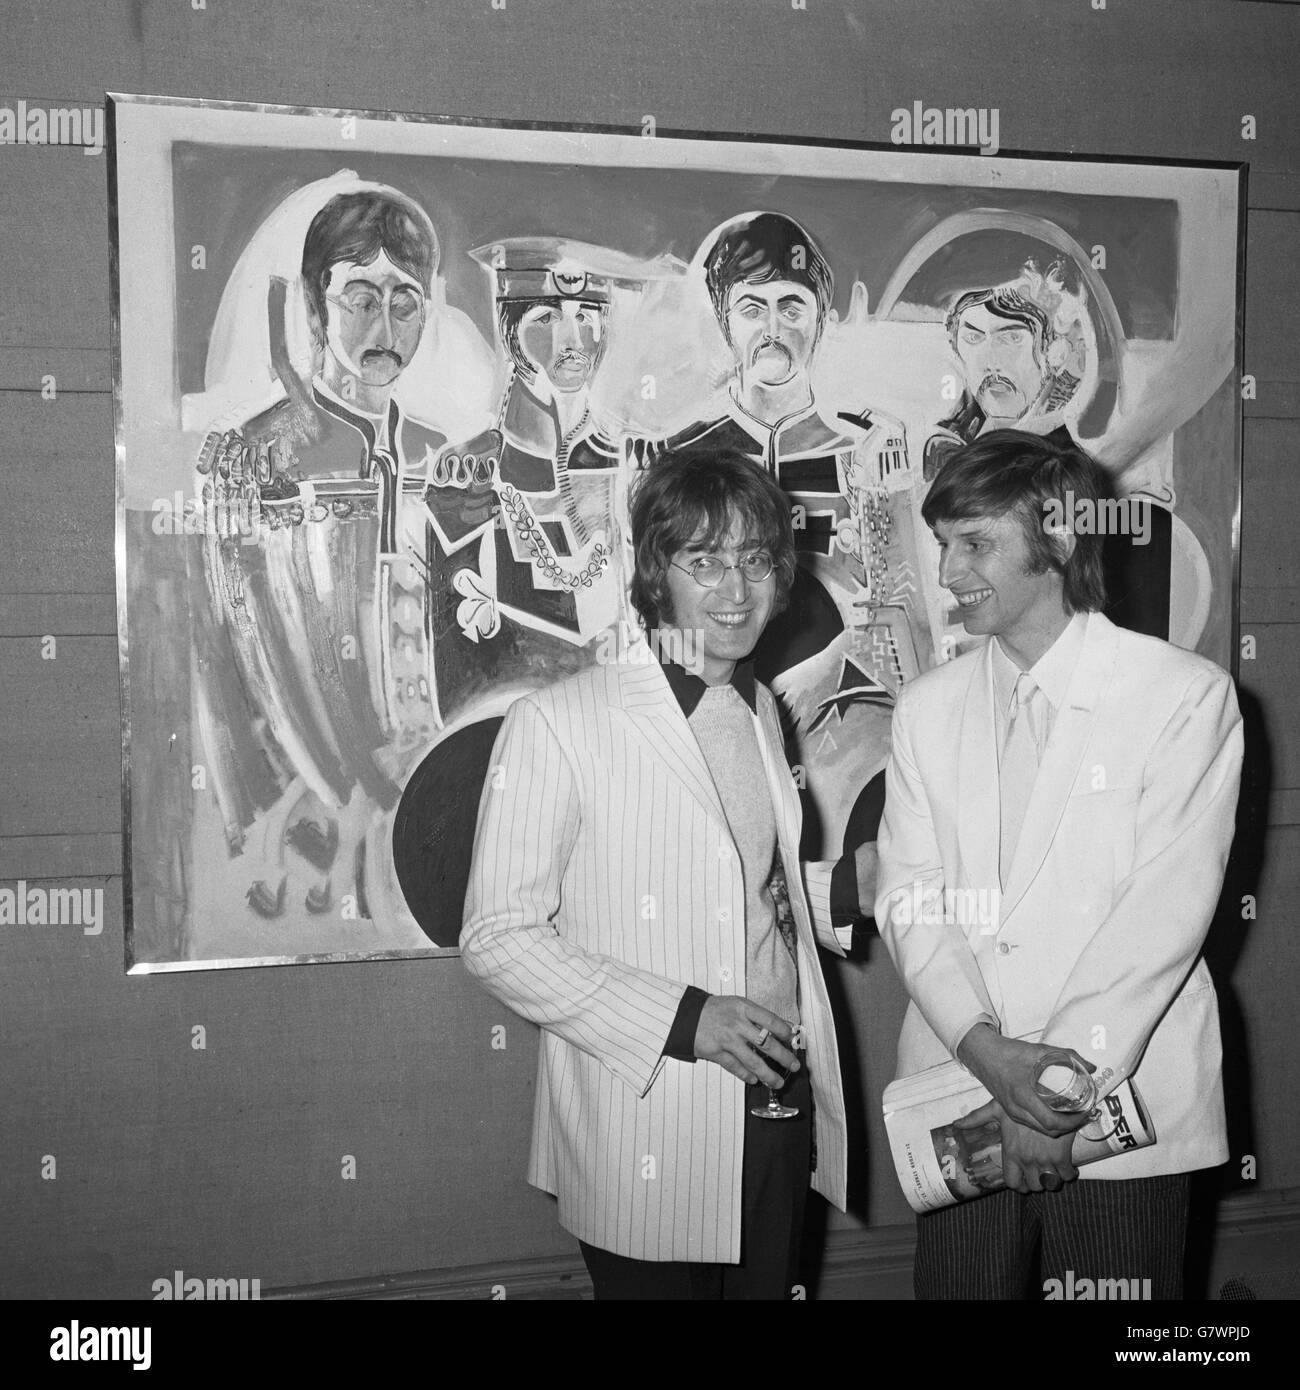 Bespectacled JOHN LENNON of The Beatles with JONATHAN HAGUE,21-year-old artist from Llandudno,seen against a picture of The Beatles, the work of Jonathan, at an exhibition of his work which opened at London's Royal Institute Galleries to-day (Monday). The Beatles John Lennon and Paul McCartney sponsored the exhibition because Jonathan (Jon) was their friend. He attended the same Liverpool College of Art as John Lennon for three years. His paintings are large, colourful, basically figurative and highly original. Stock Photo